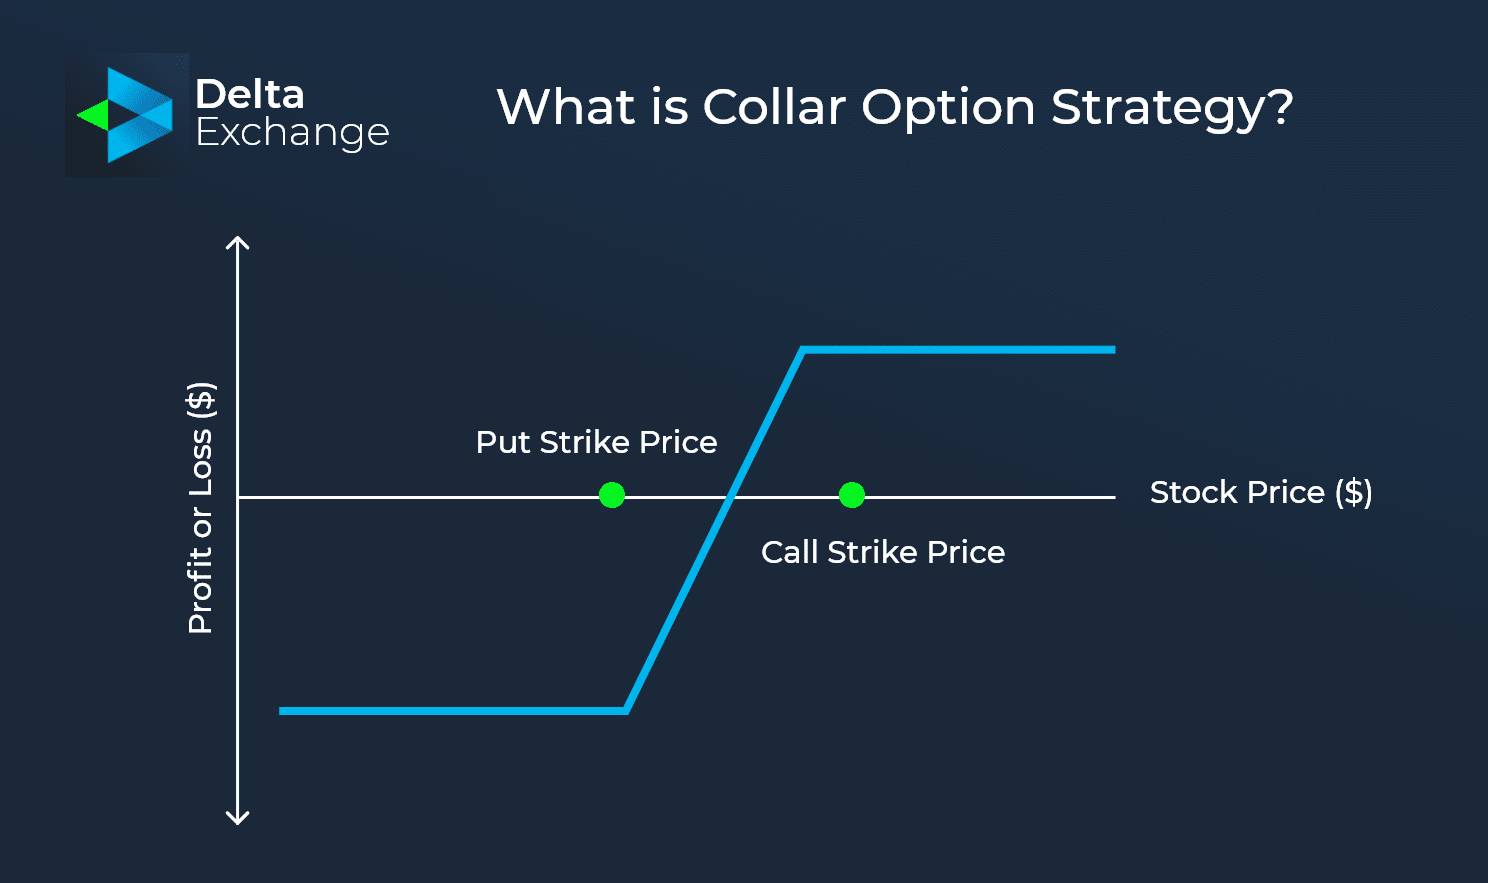 What is Collar Option Strategy?